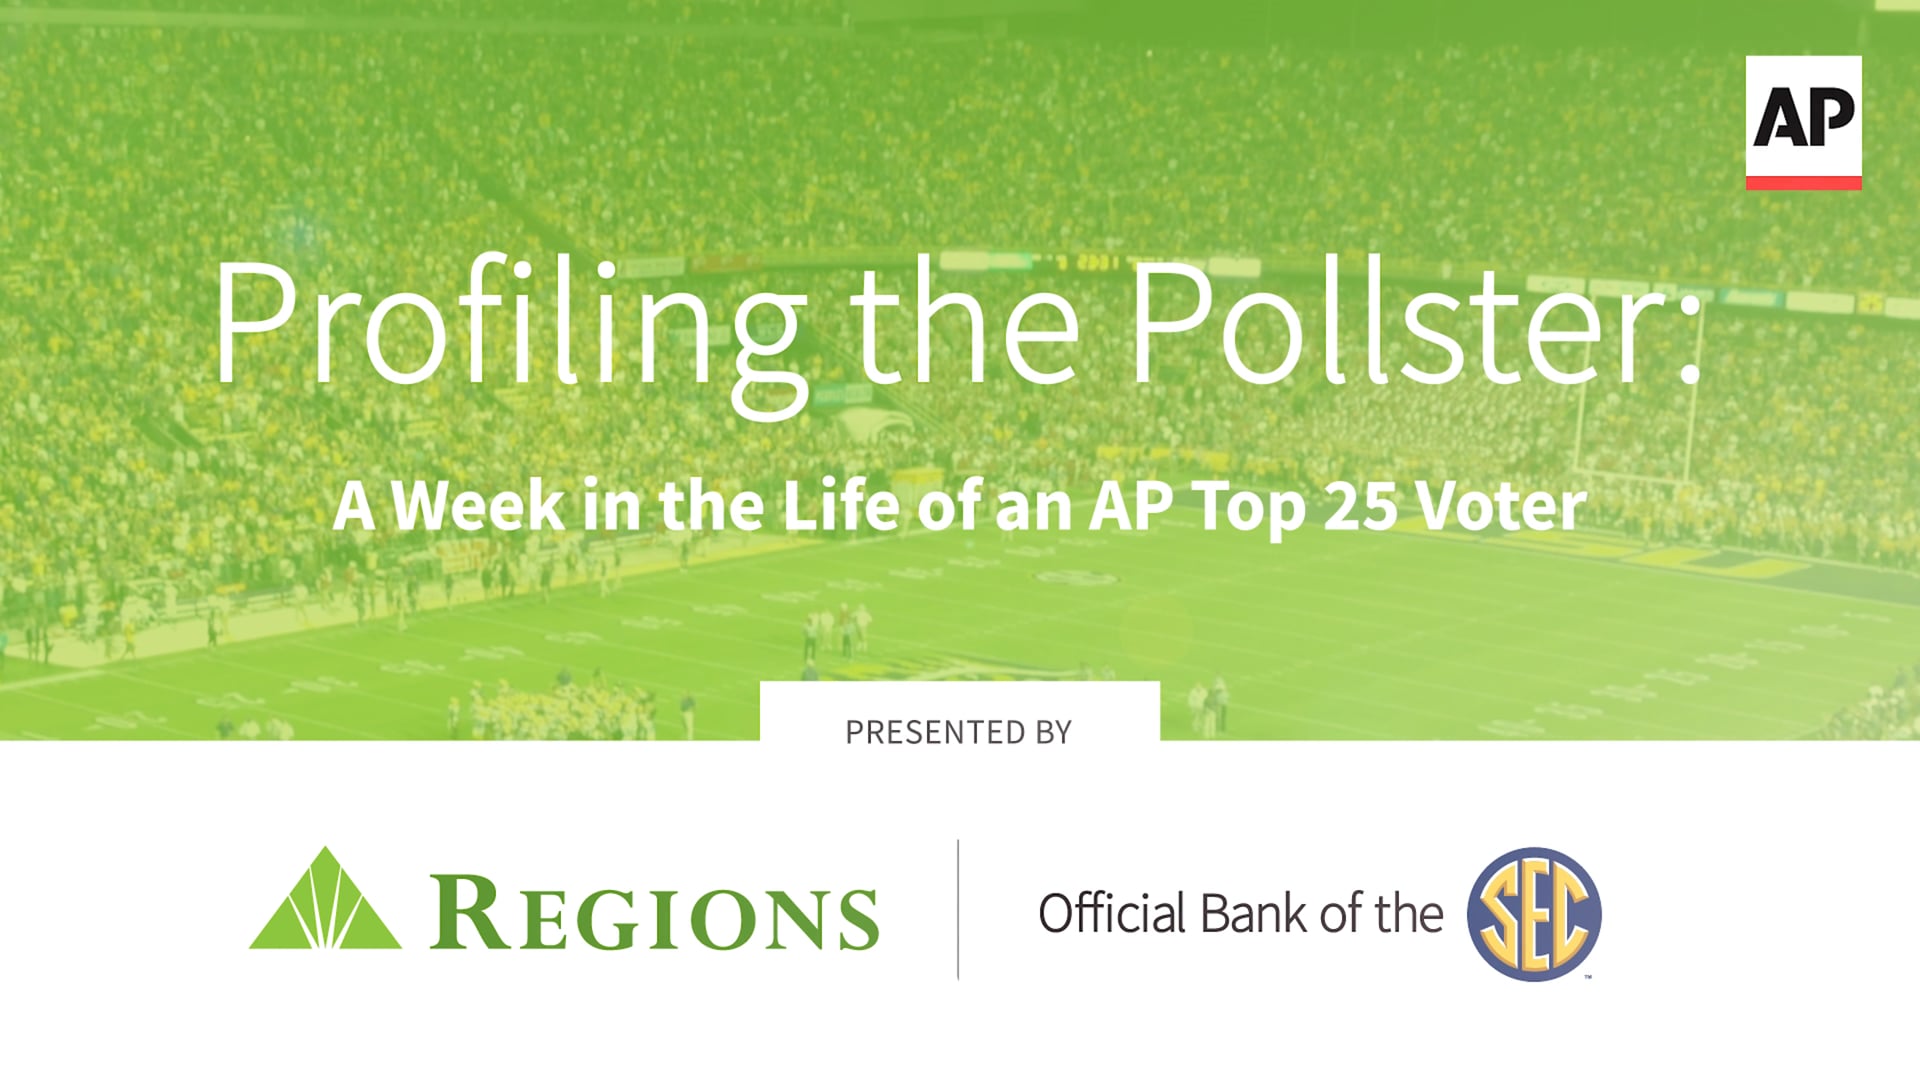 AP Top 25 - "Profiling the Pollster"(Day in the Life)